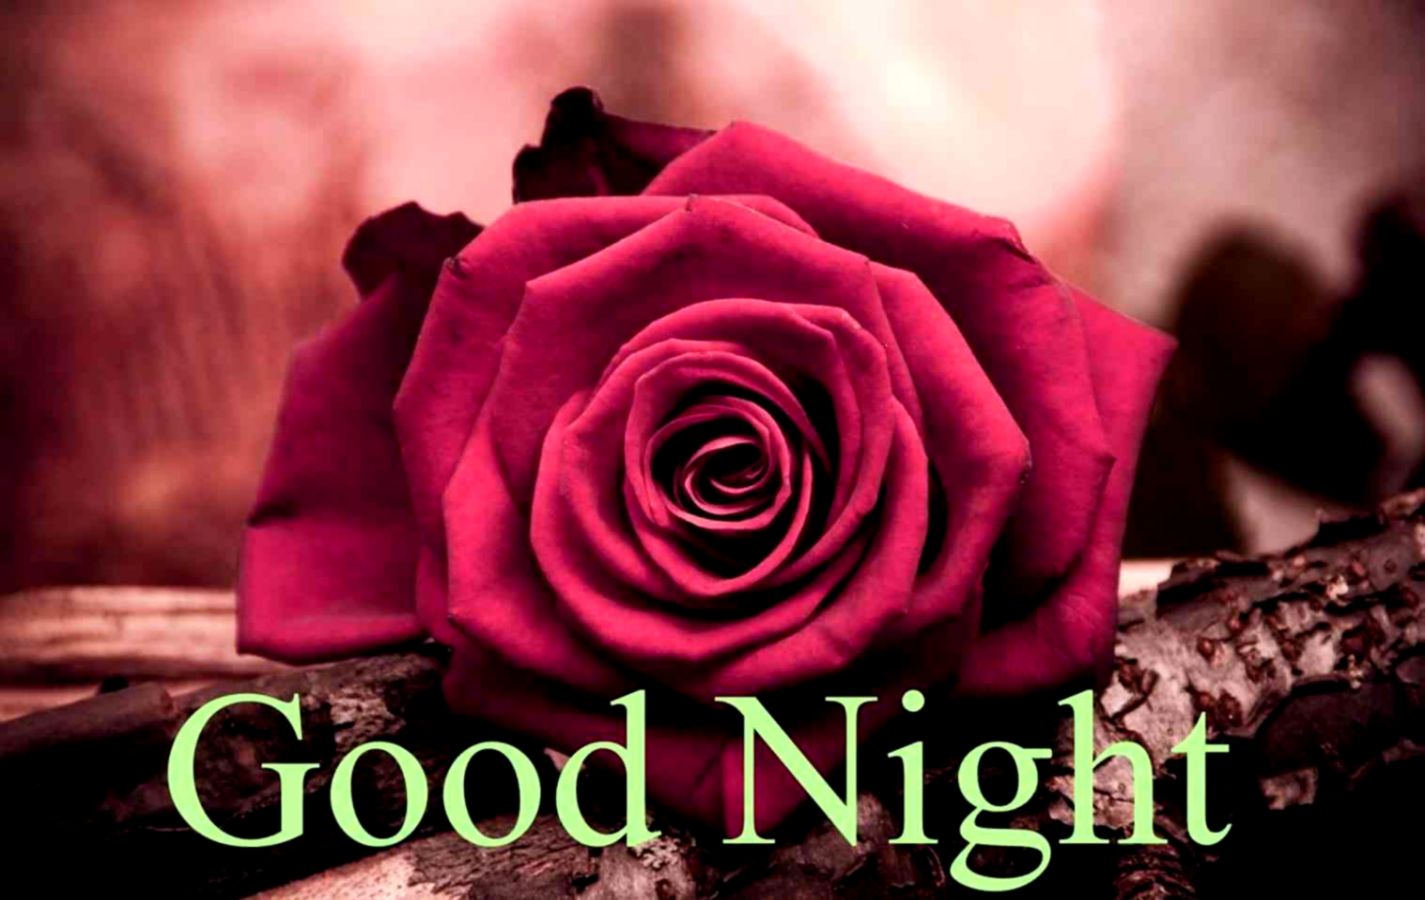 30 Best Good Night Images Pictures With Most Beautiful - Rose Flower  Wallpaper Desktop - 1425x900 Wallpaper 